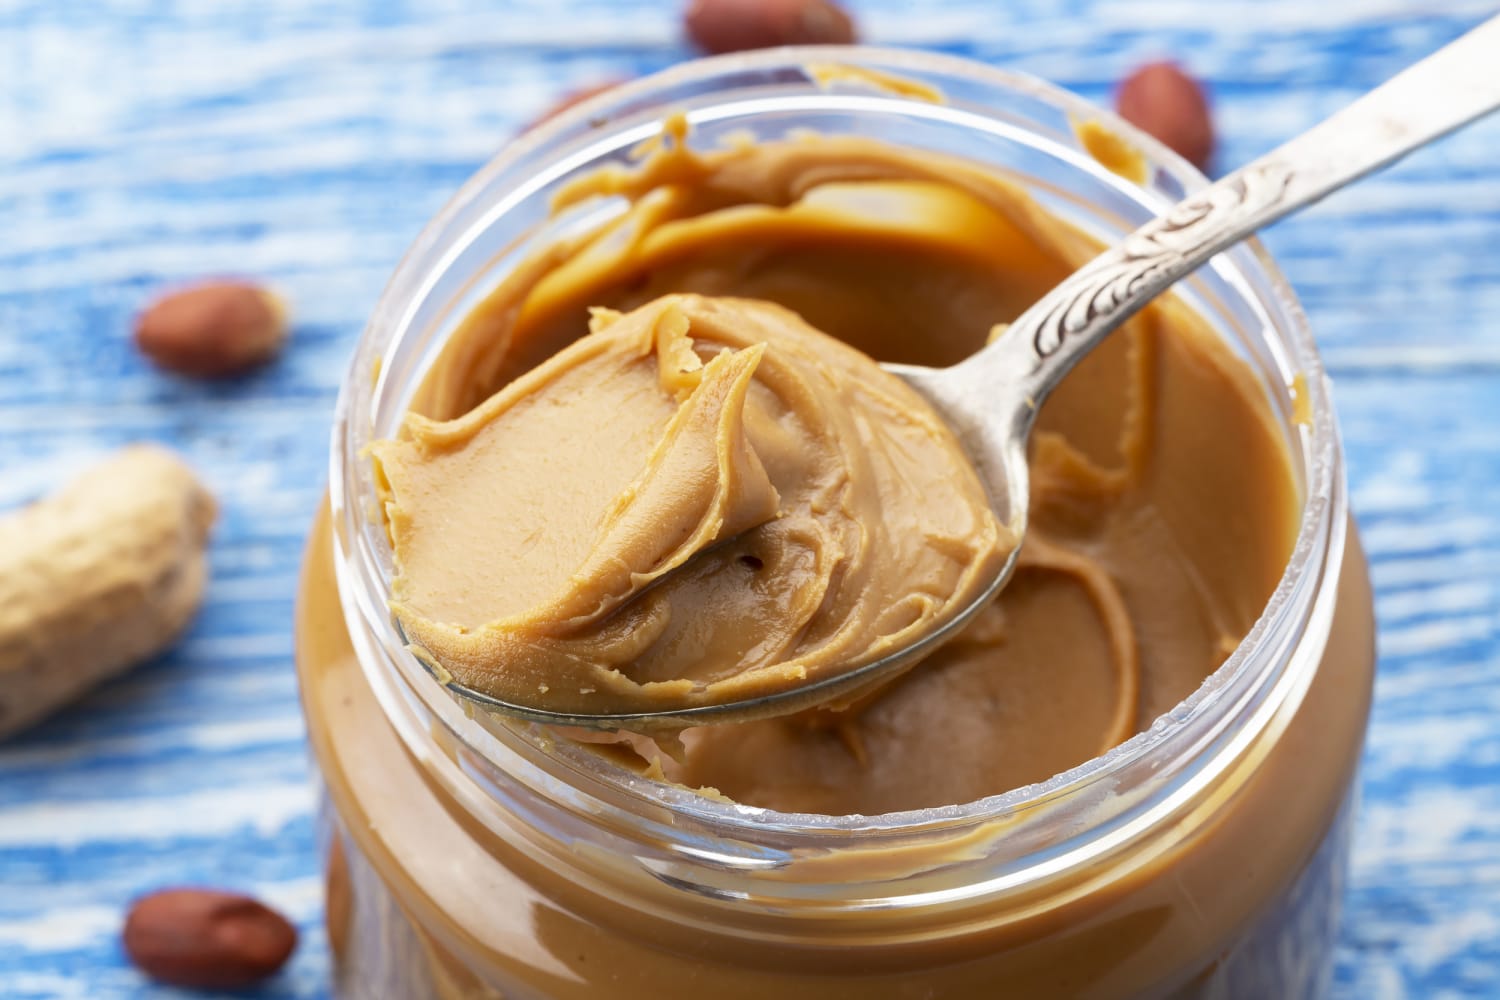 11 deals for National Peanut Butter Day to stir up the savings